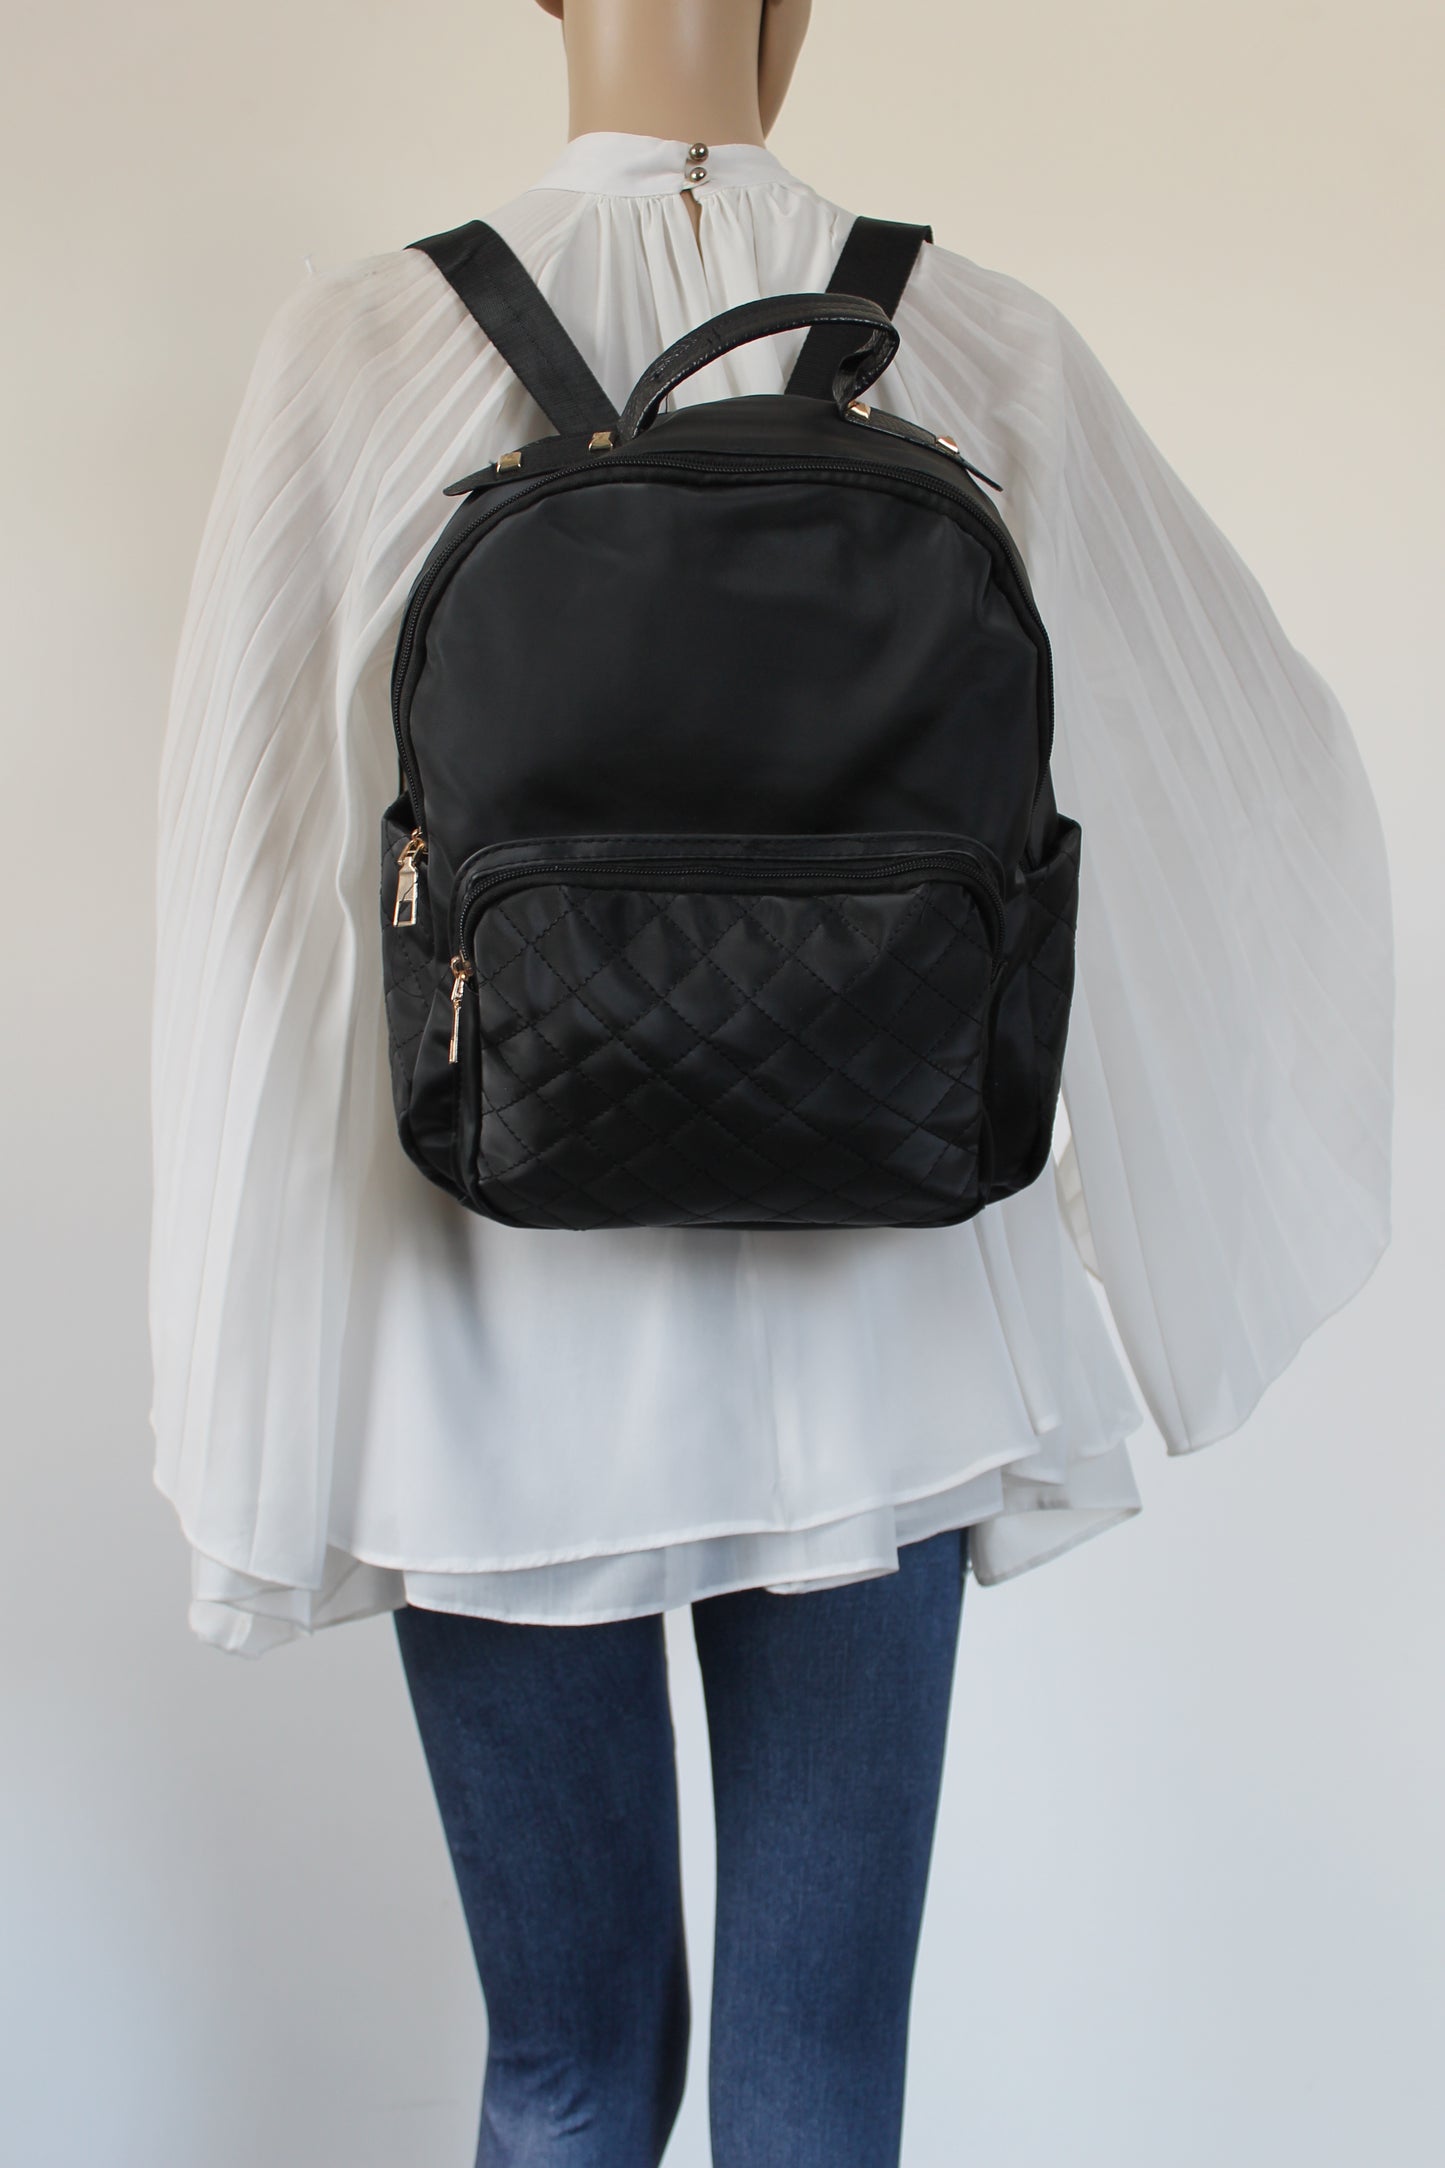 Swanky Swans Jenson Backpack Black Perfect Backpack for school!